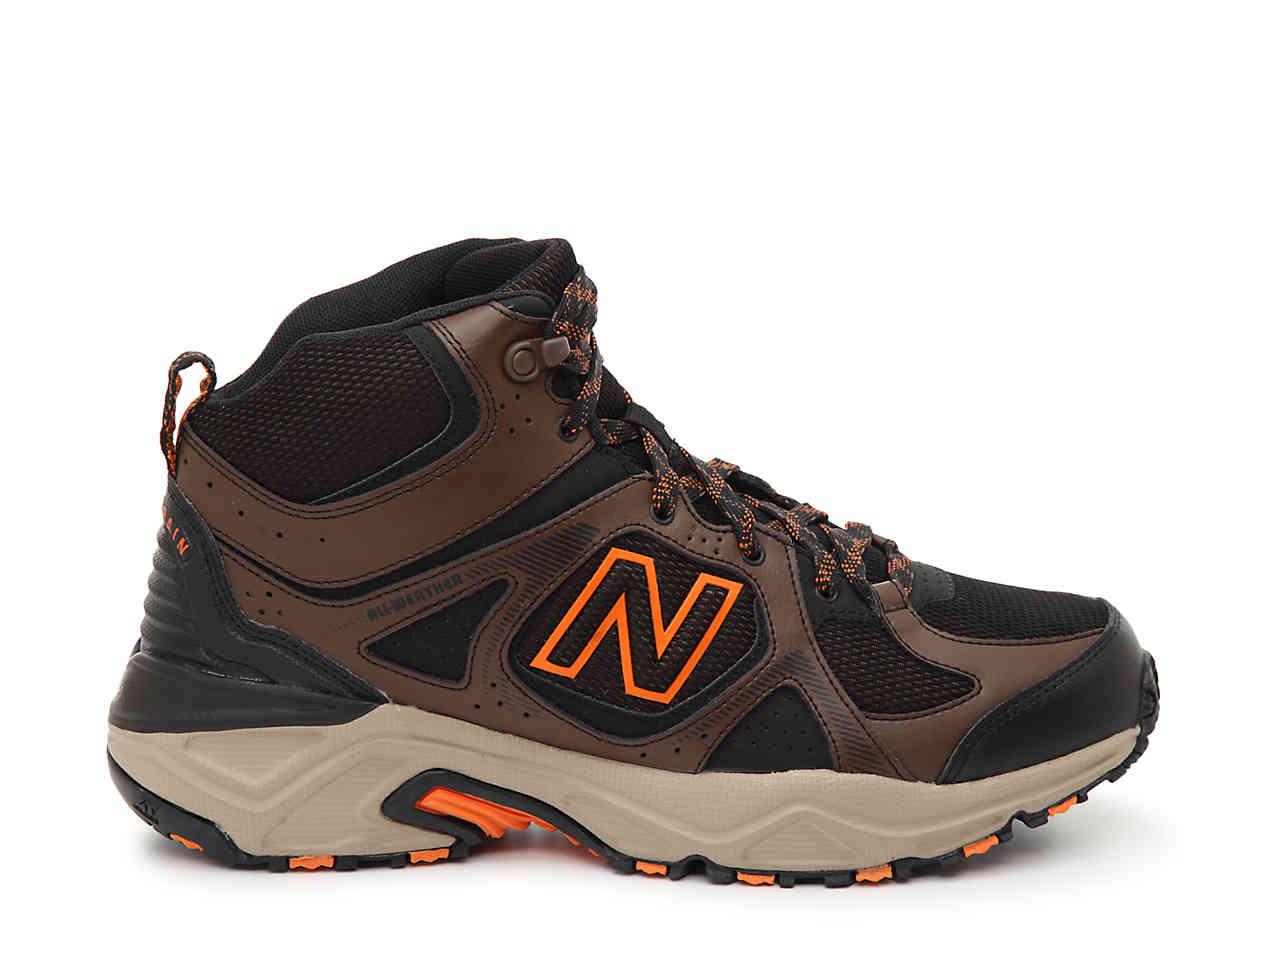 new balance 481 trail running shoes